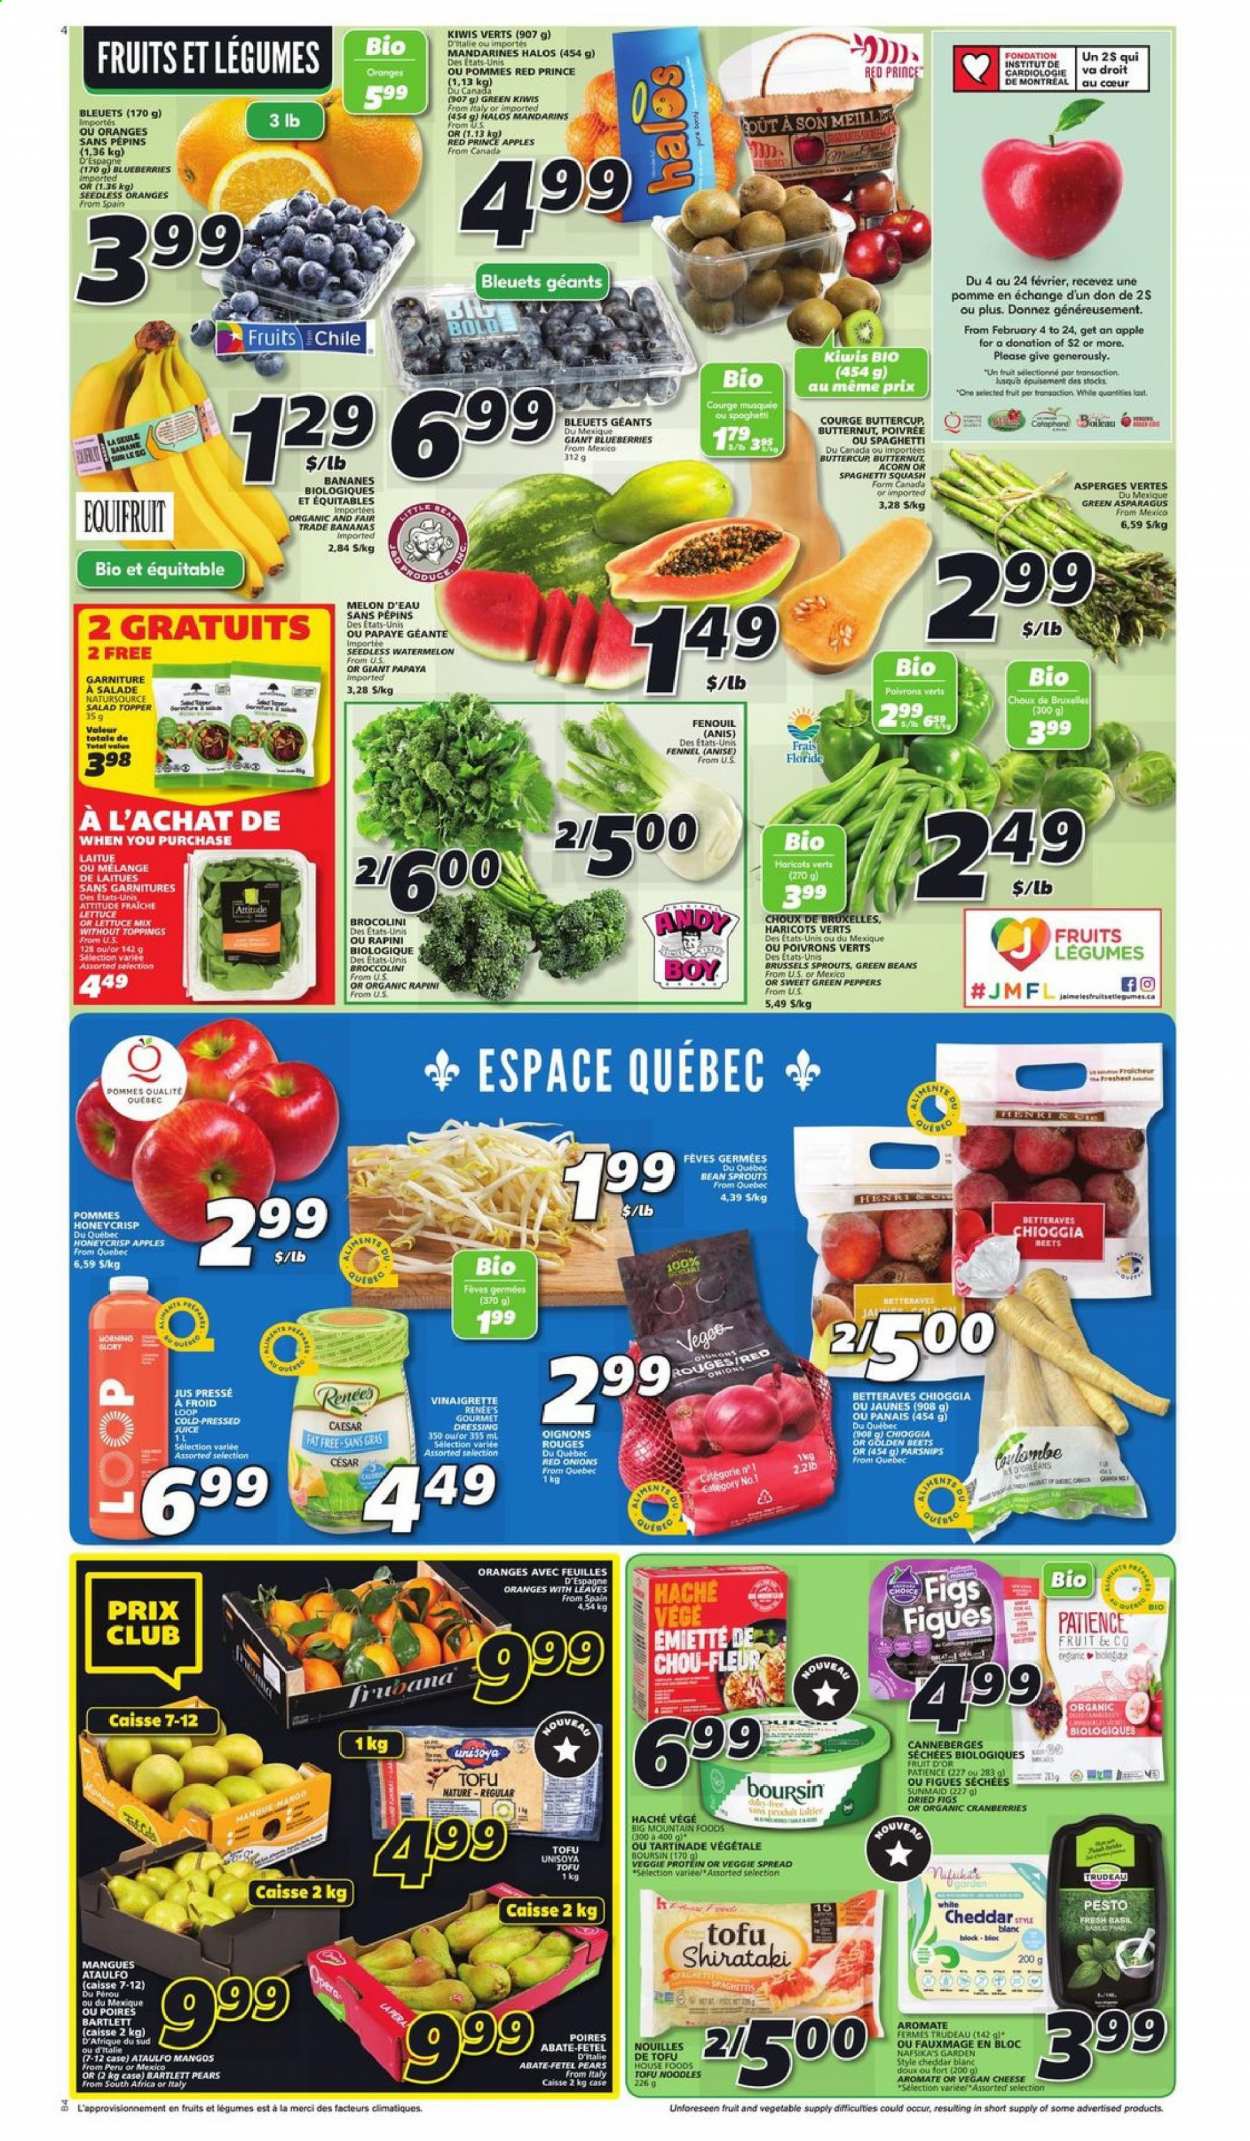 thumbnail - IGA Flyer - February 18, 2021 - February 24, 2021 - Sales products - beans, butternut squash, green beans, red onions, parsnips, onion, salad, bean sprouts, peppers, brussel sprouts, broccolini, apples, bananas, Bartlett pears, blueberries, mandarines, watermelon, papaya, pears, melons, noodles, cheddar, tofu, Merci, cranberries, esponja, fennel, vinaigrette dressing, dressing, dried figs, juice, kiwi. Page 3.